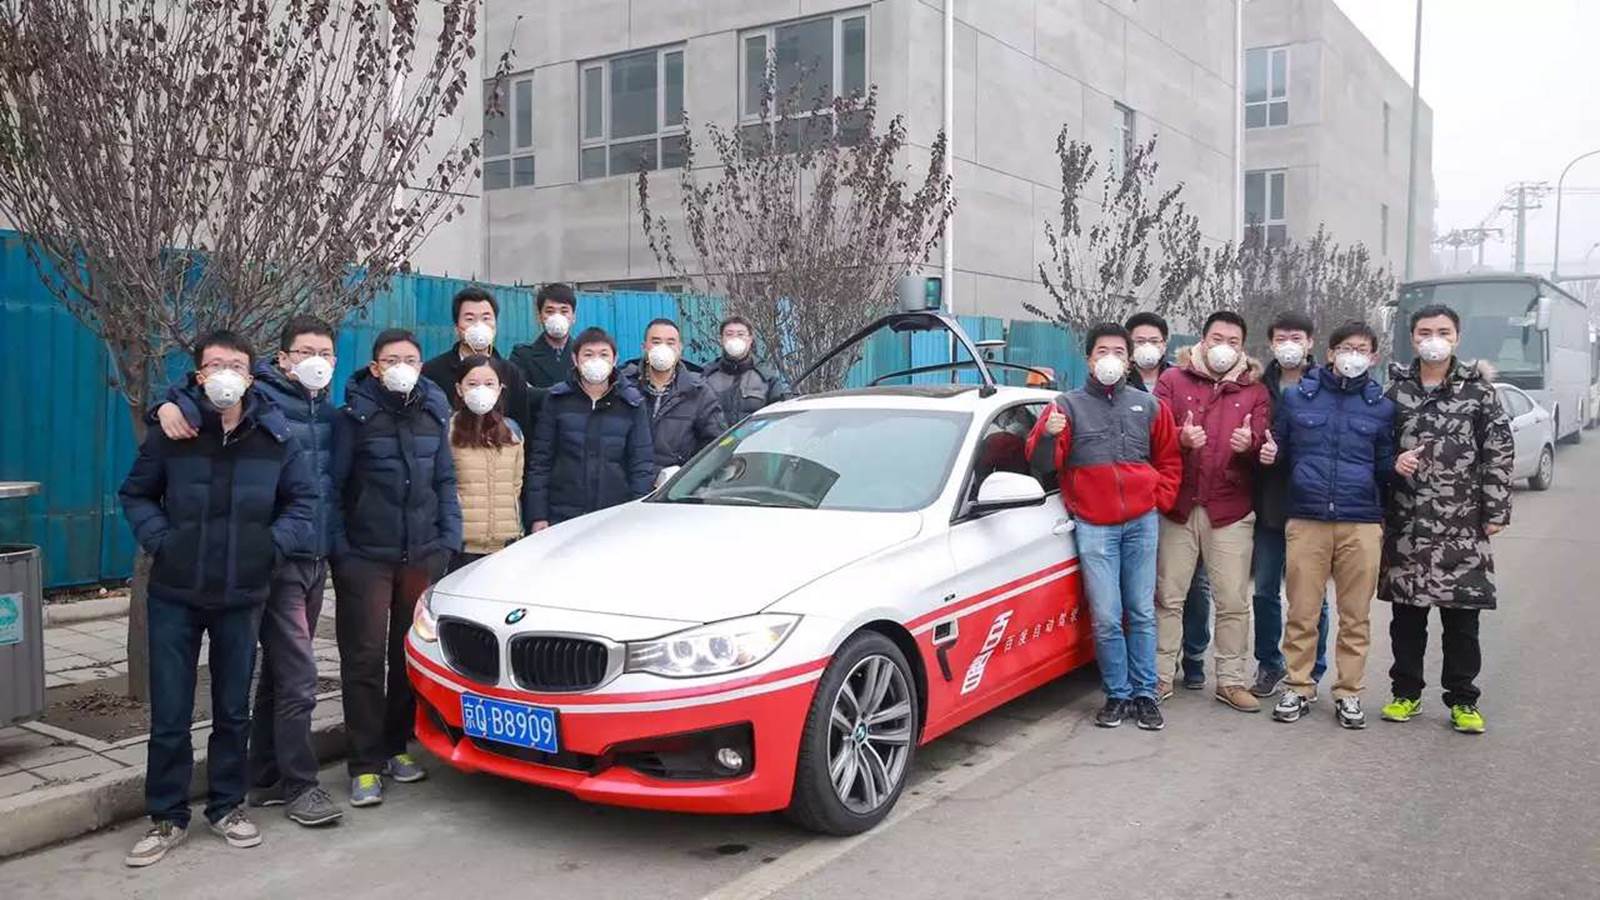 The Baidu autonomous driving team, with the modified BMW 3 Series